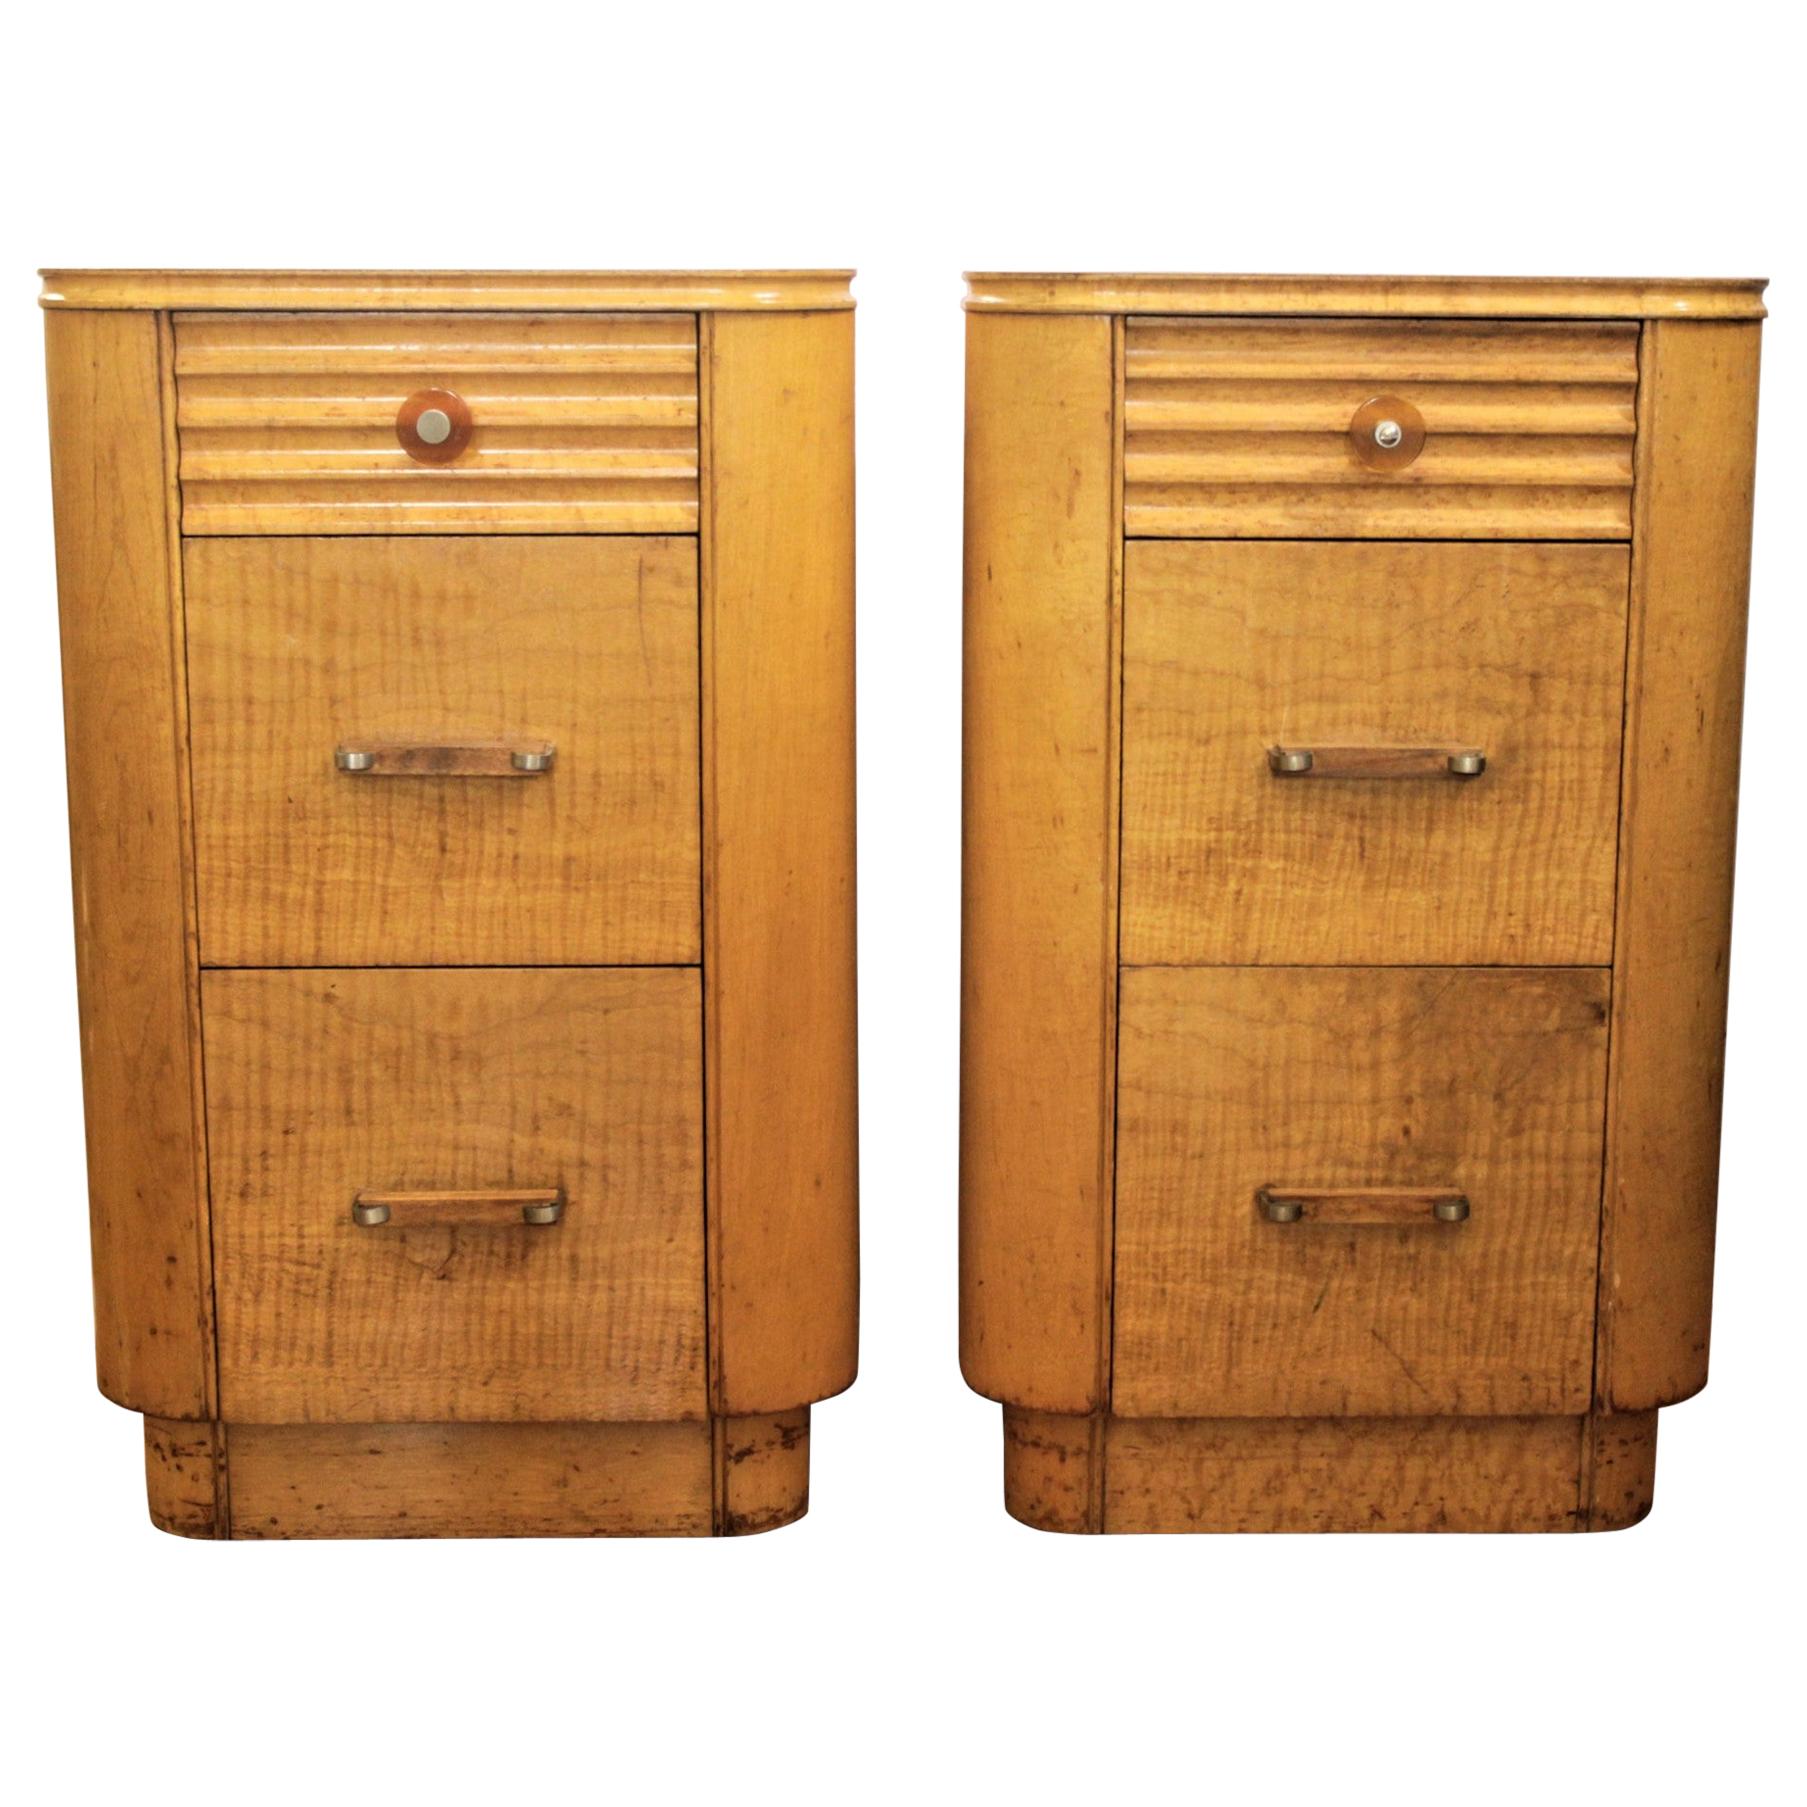 MAPLE STYLE WIDE 3 DRAW PACK CHEST FRONTS  STOCK #SK16 